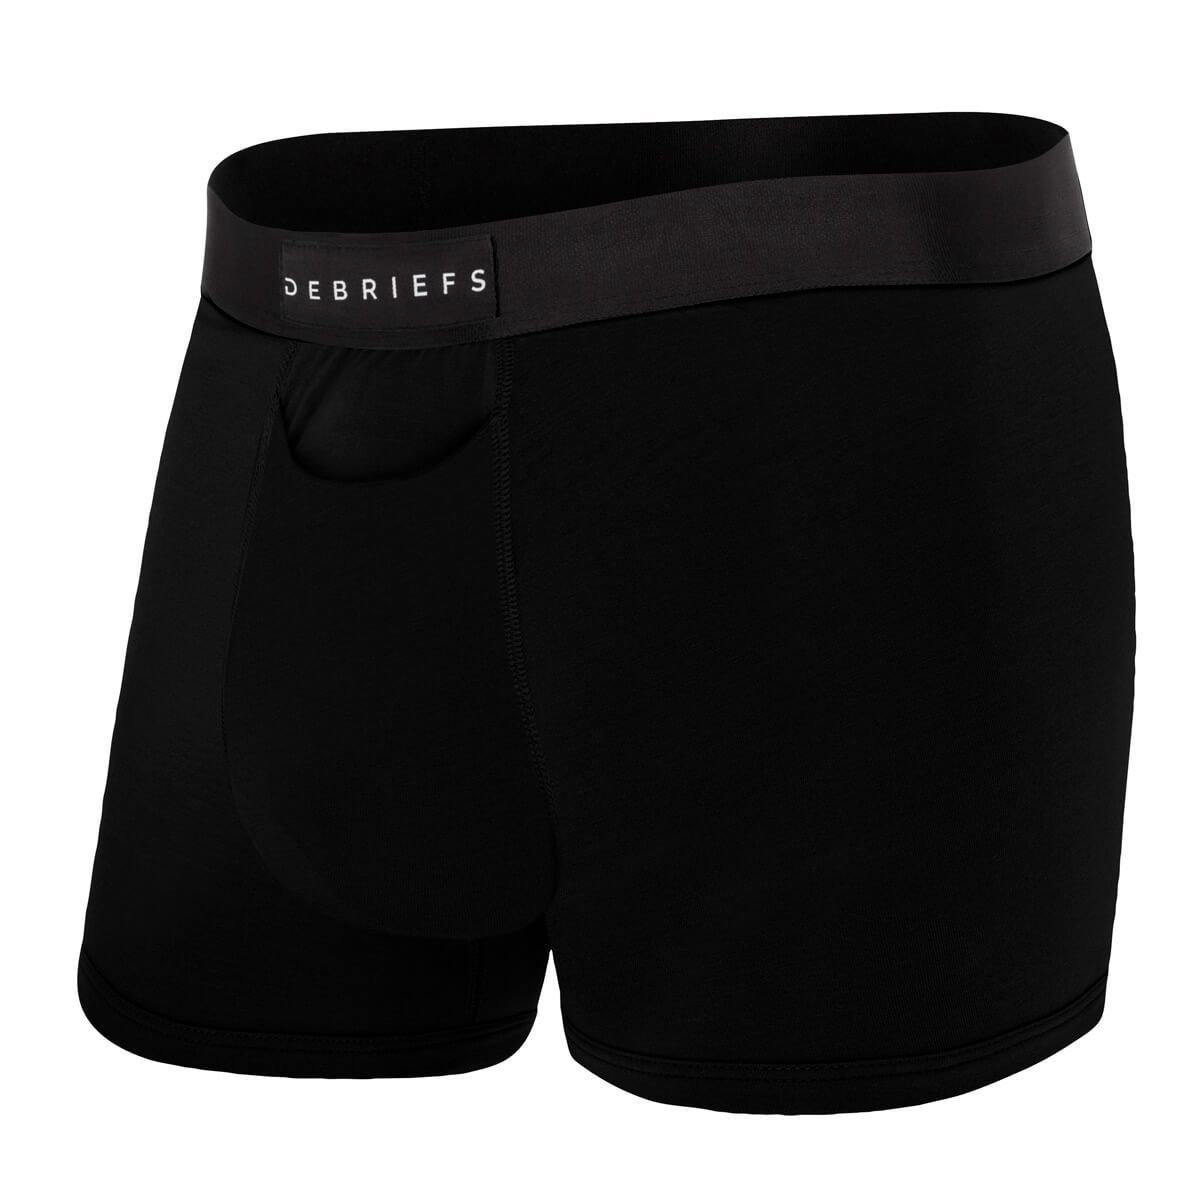 Mens Trunks Underwear Subscription - Join the Club!